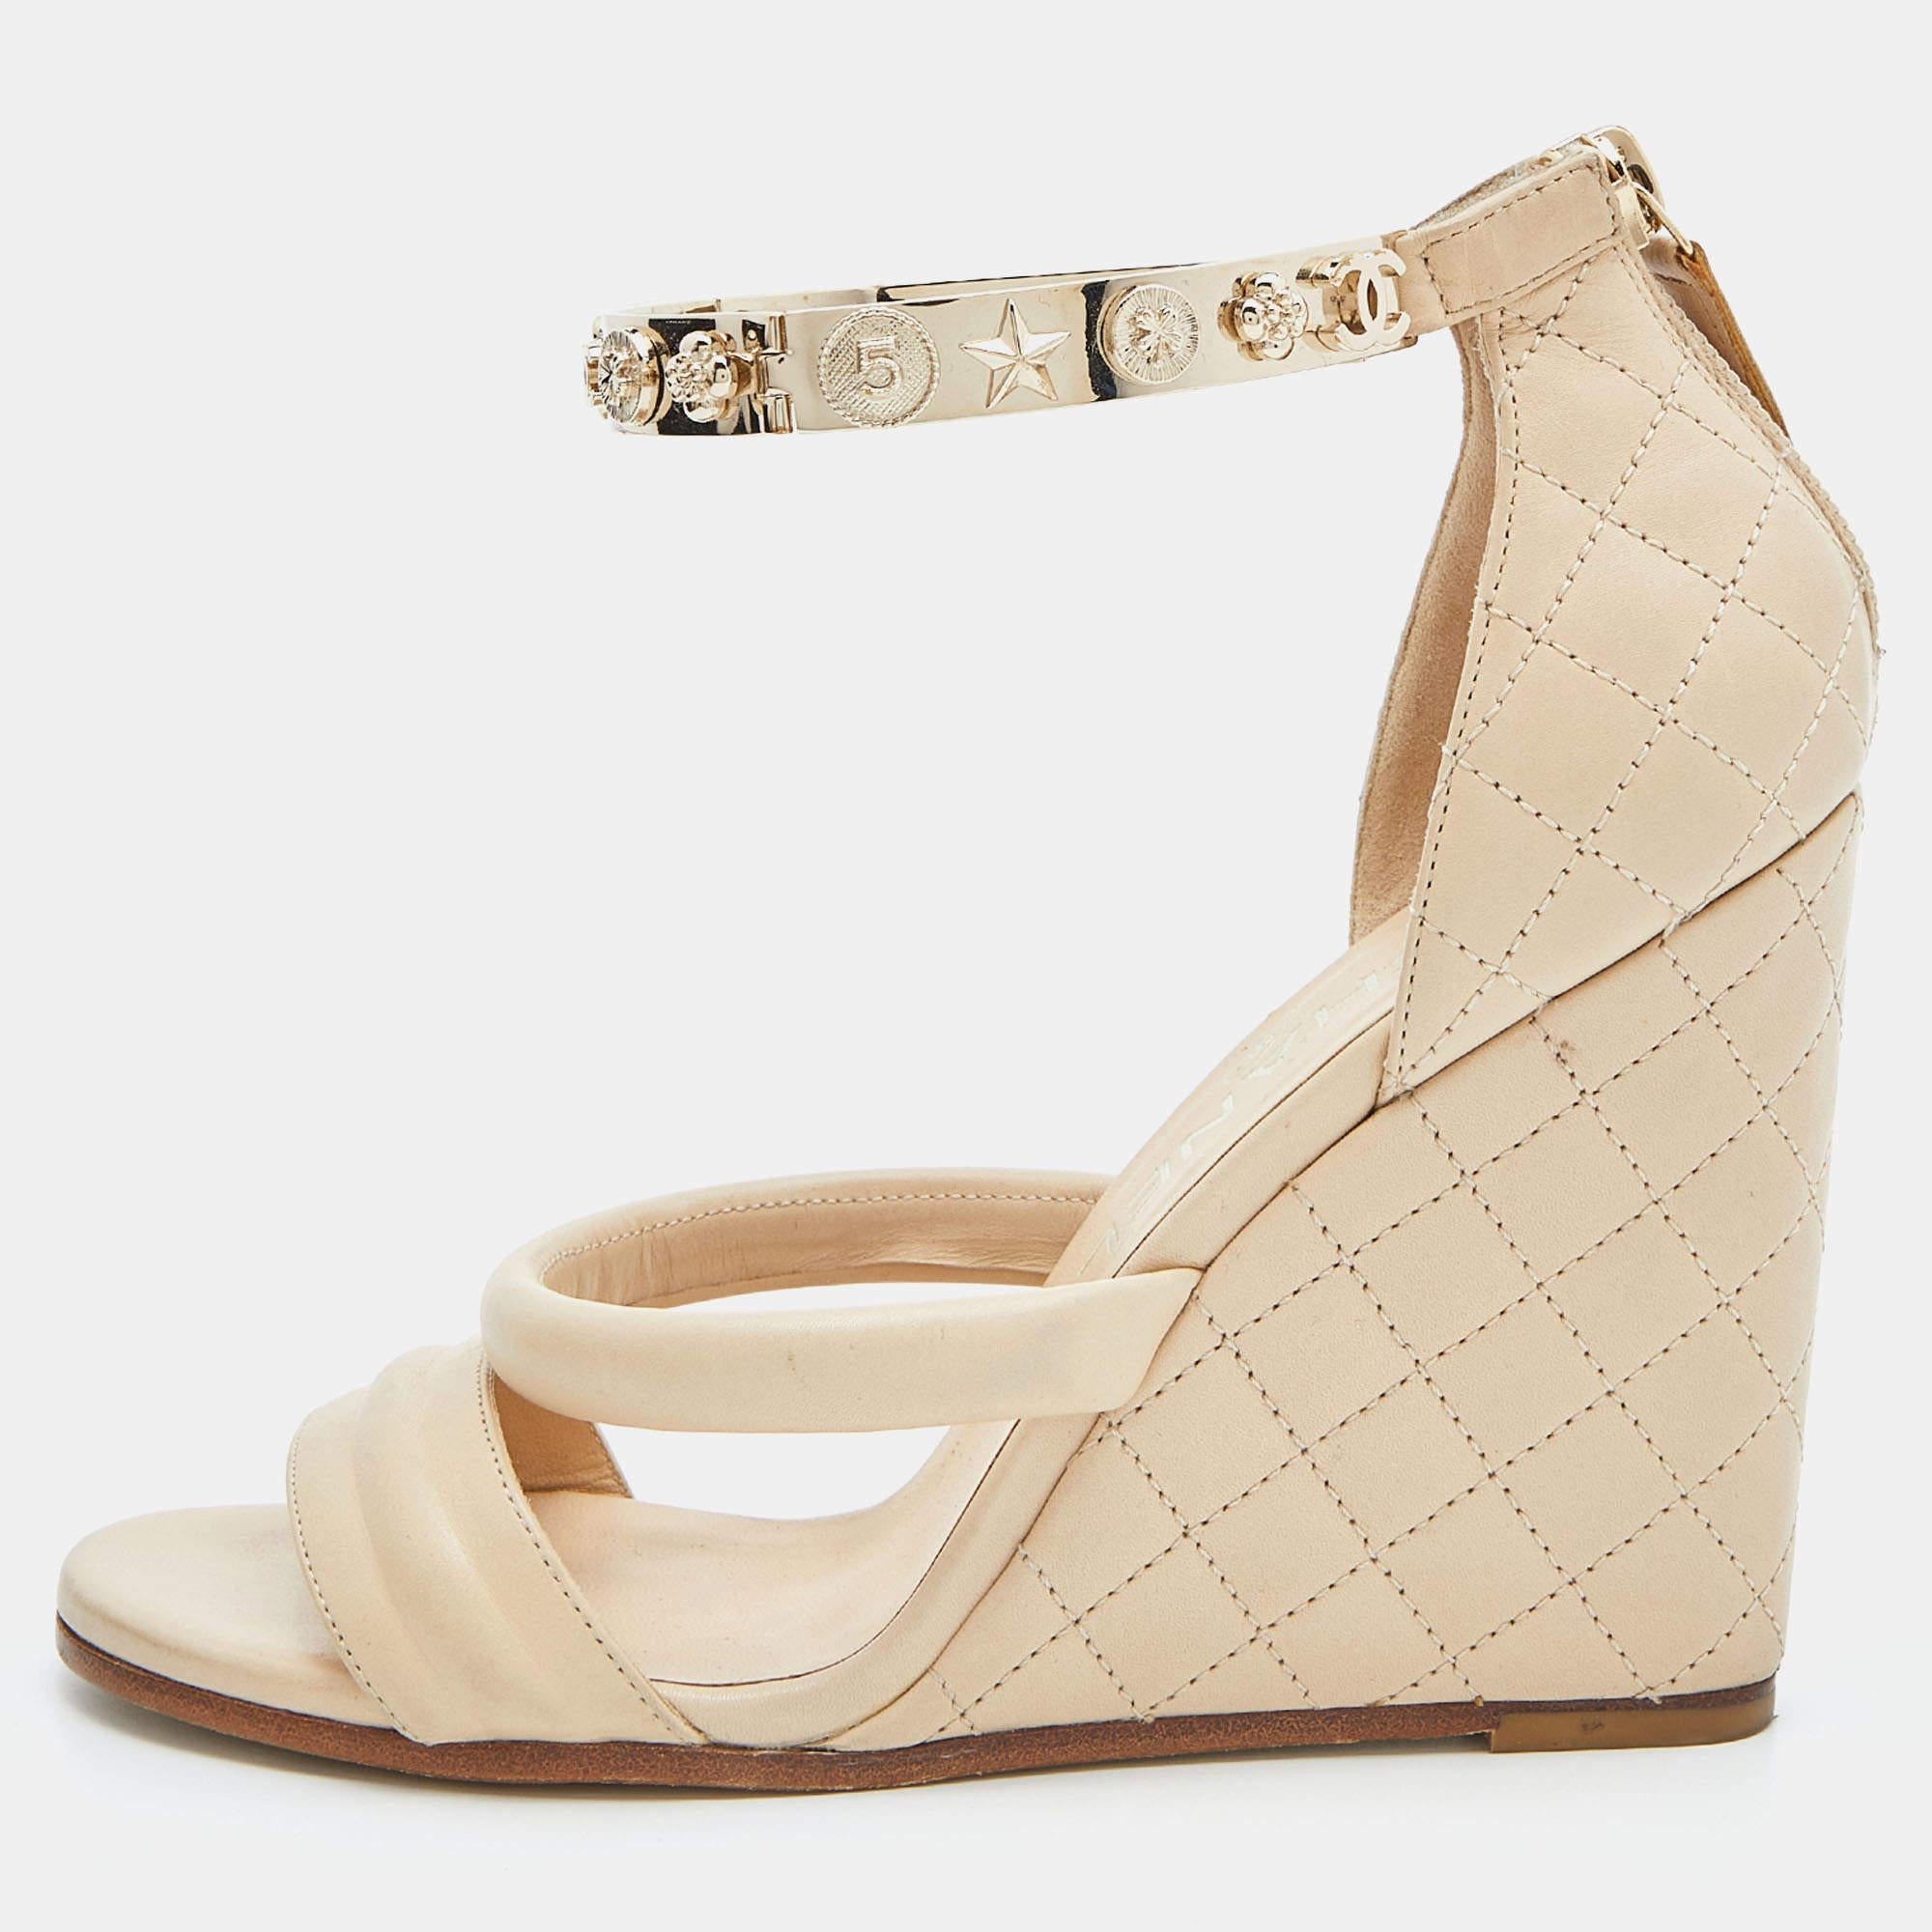 Chanel Beige Quilted Leather Bracelet Ankle Strap Wedge Sandals Size 36 3